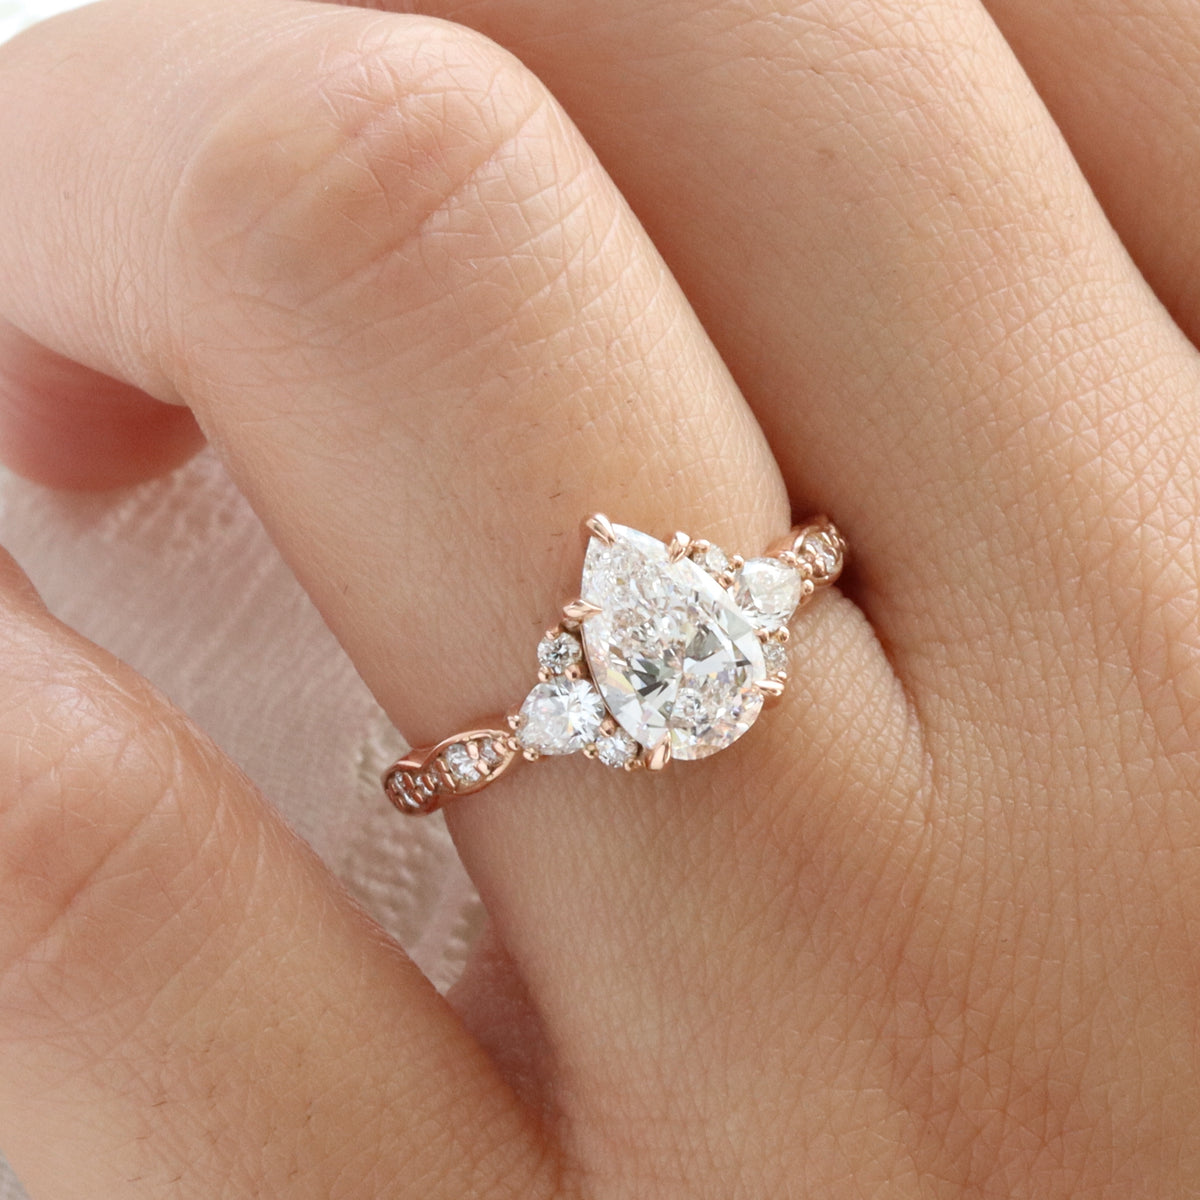 Large lab grown diamond 3 stone engagement ring rose gold cluster pear diamond ring la more design jewelry